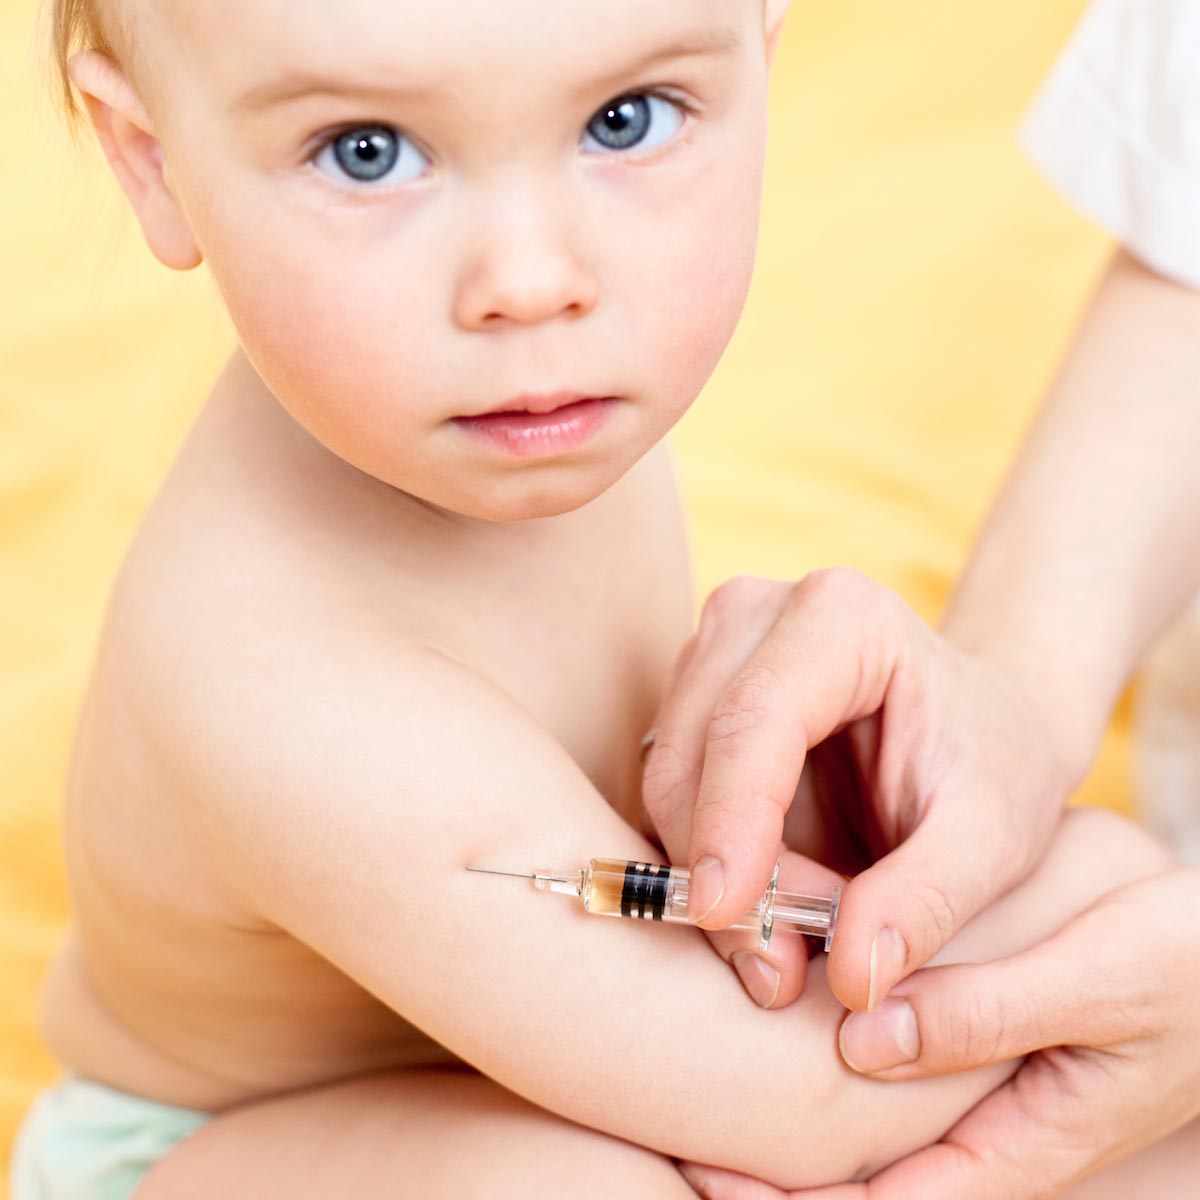 More studies show unvaccinated children are healthier than vaccinated children